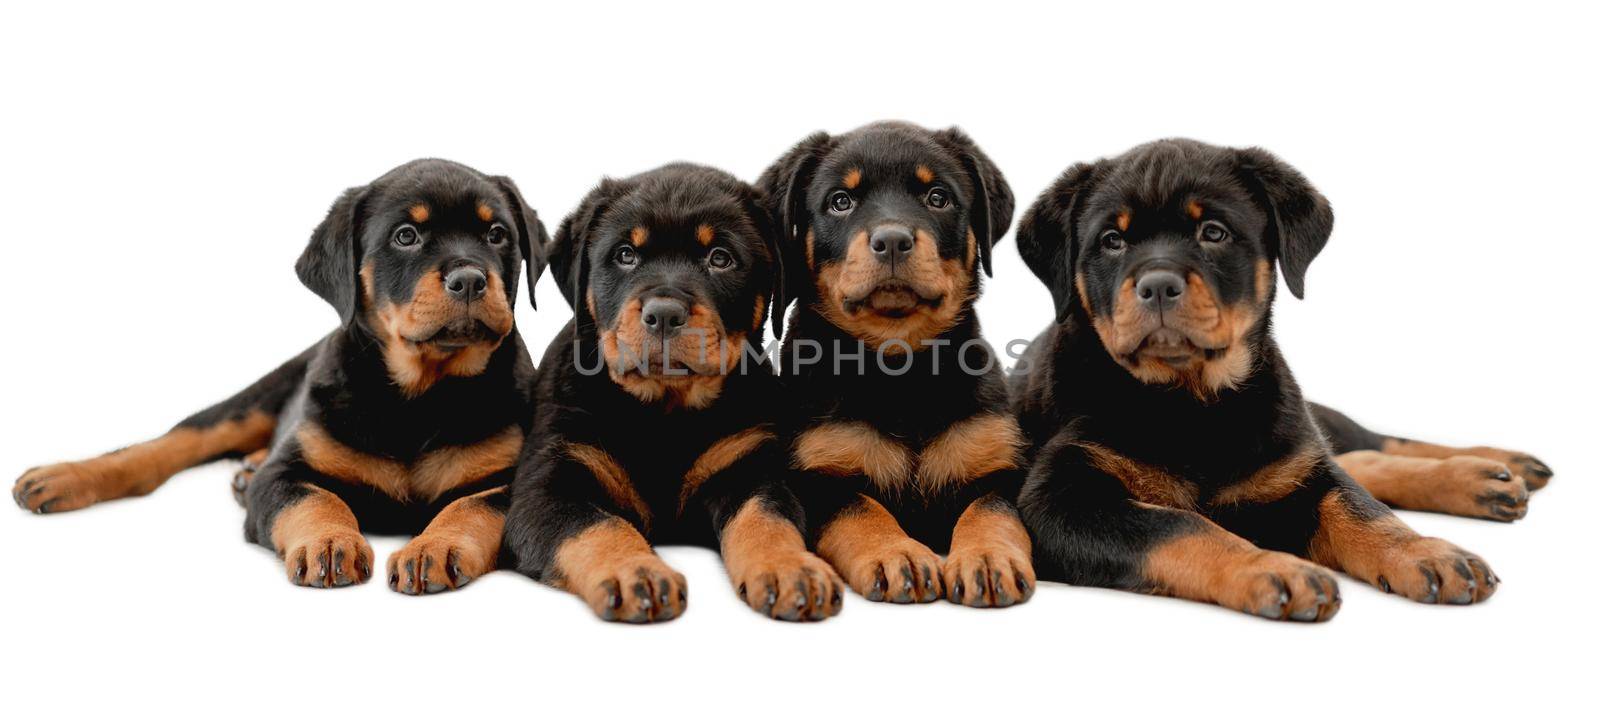 Four rottweiler puppies lie isolated on white backgroung and looking at camera